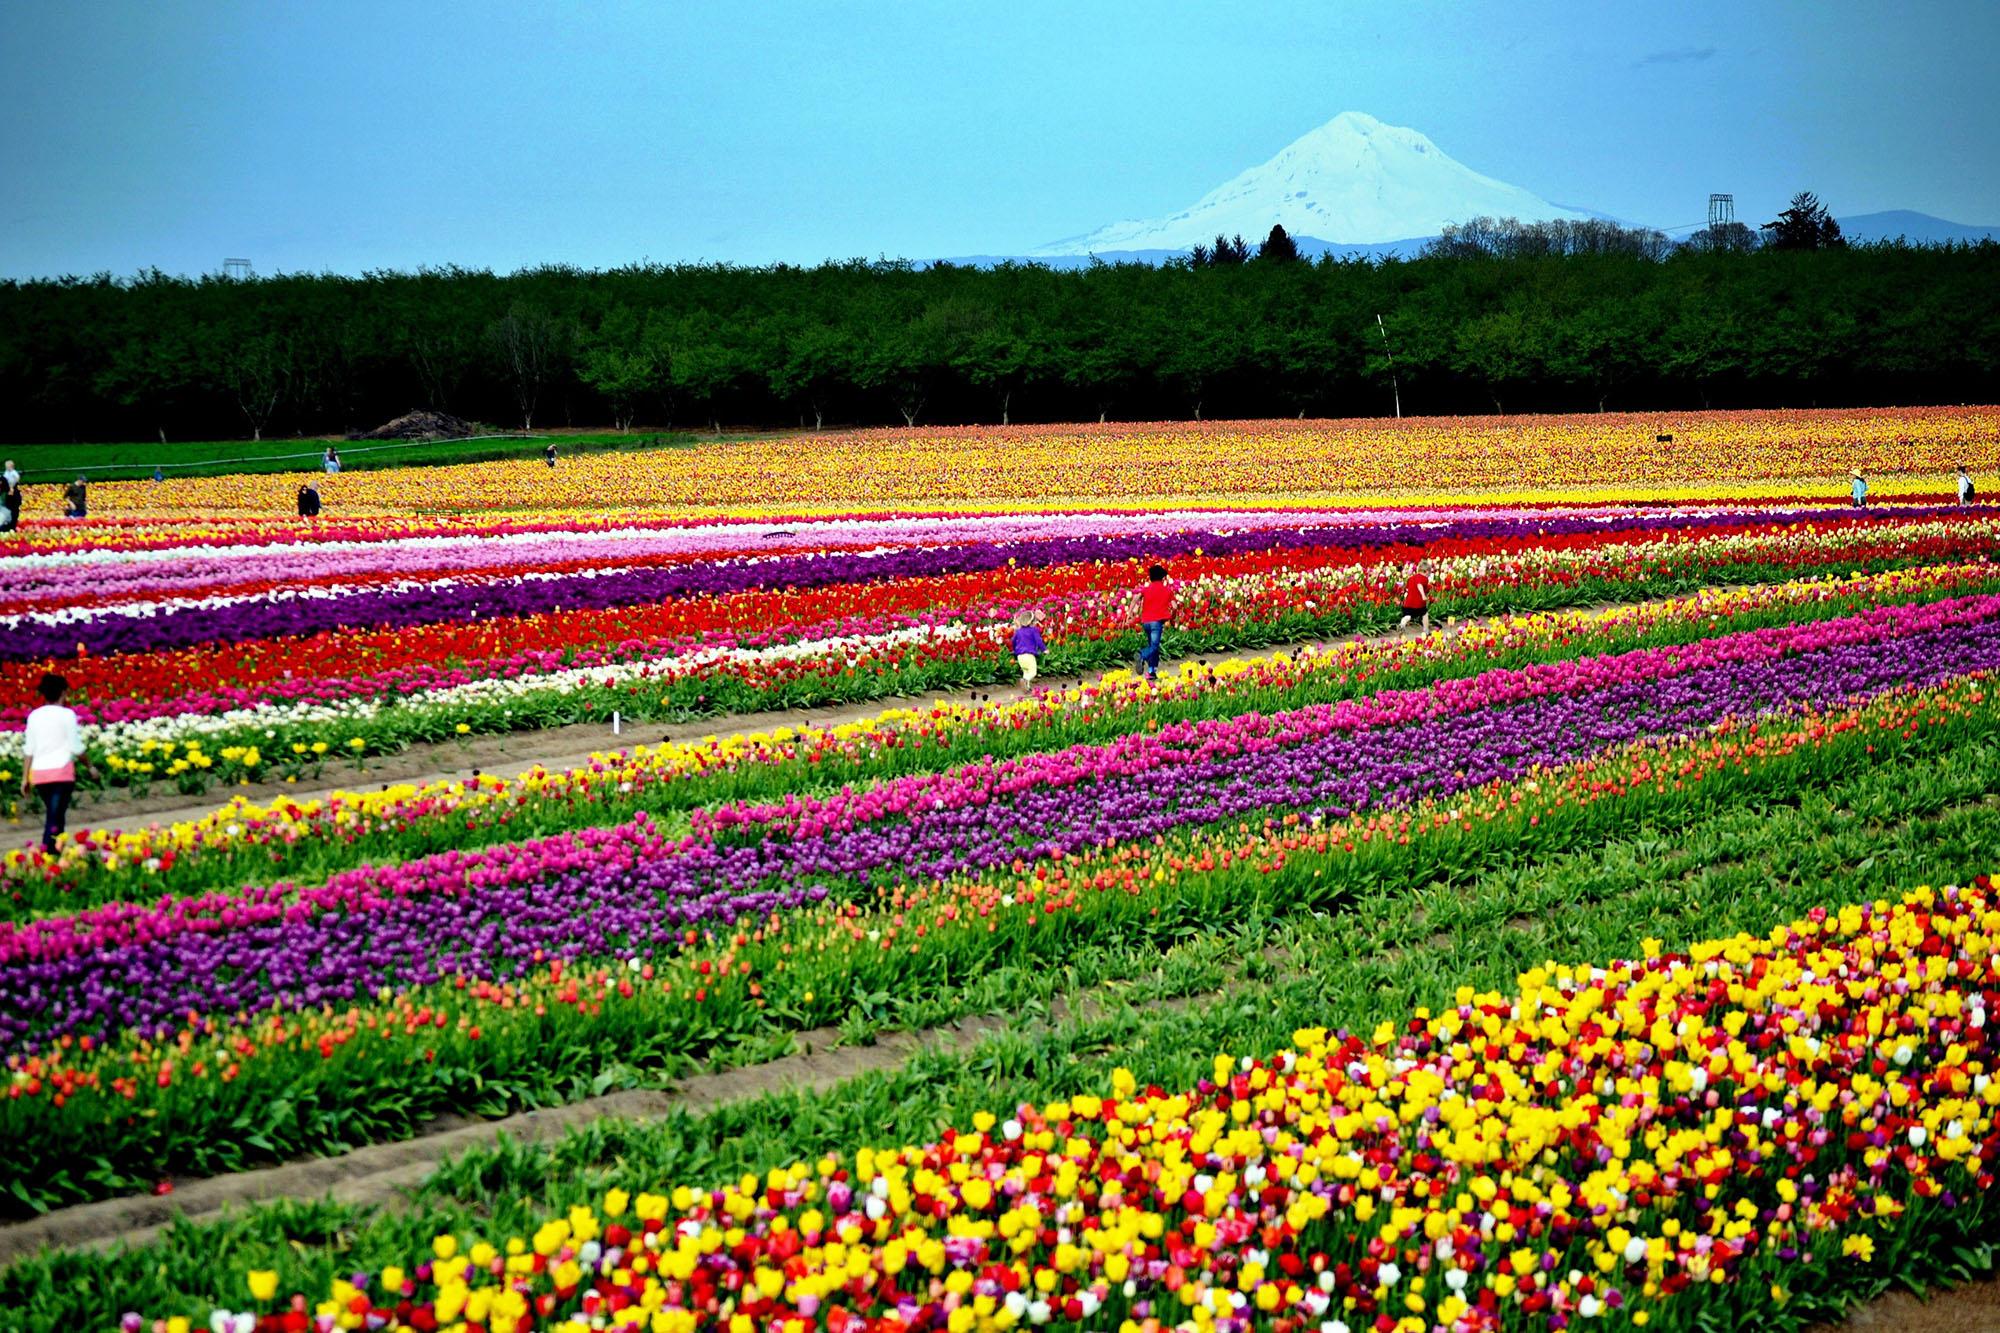 Skagit Valley Tulip Festival Expects April Flowers After Two Years